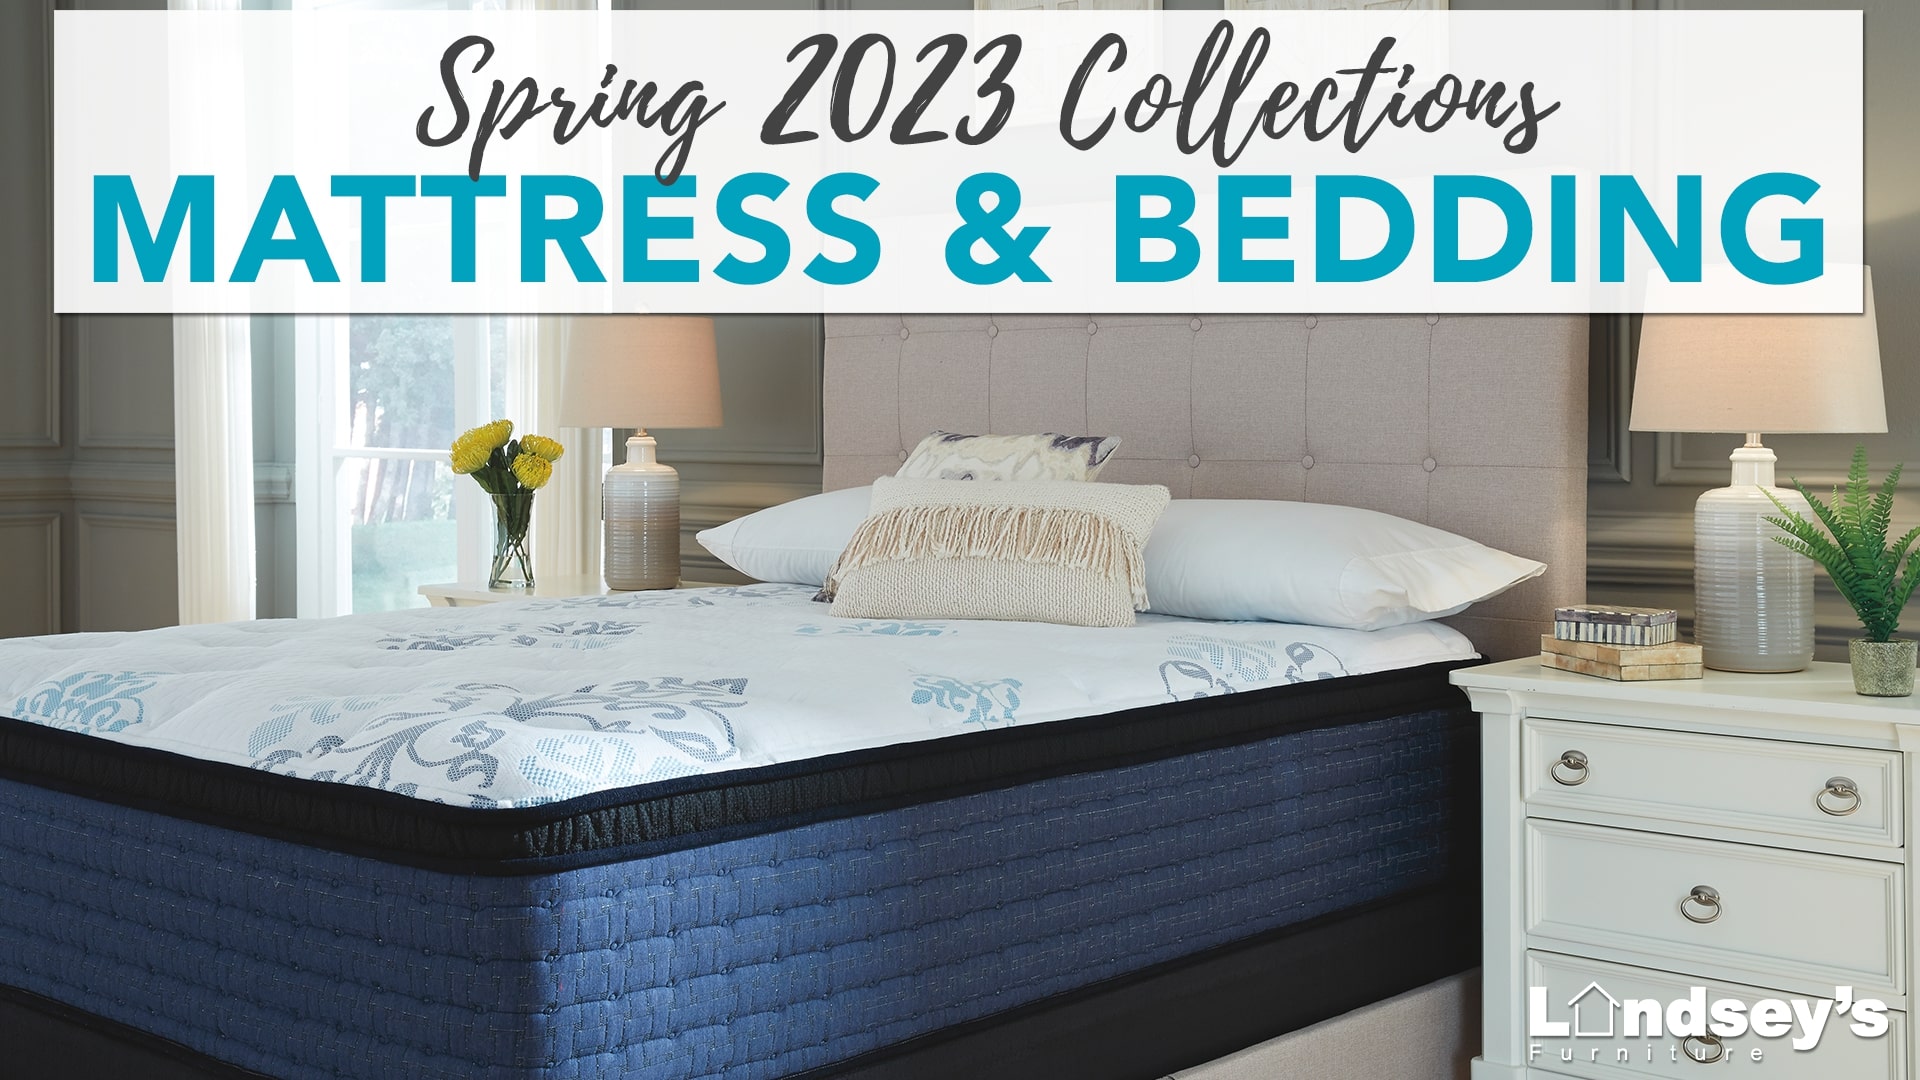 The Top Mattress and Bedding Collections for Spring in Panama City Beach